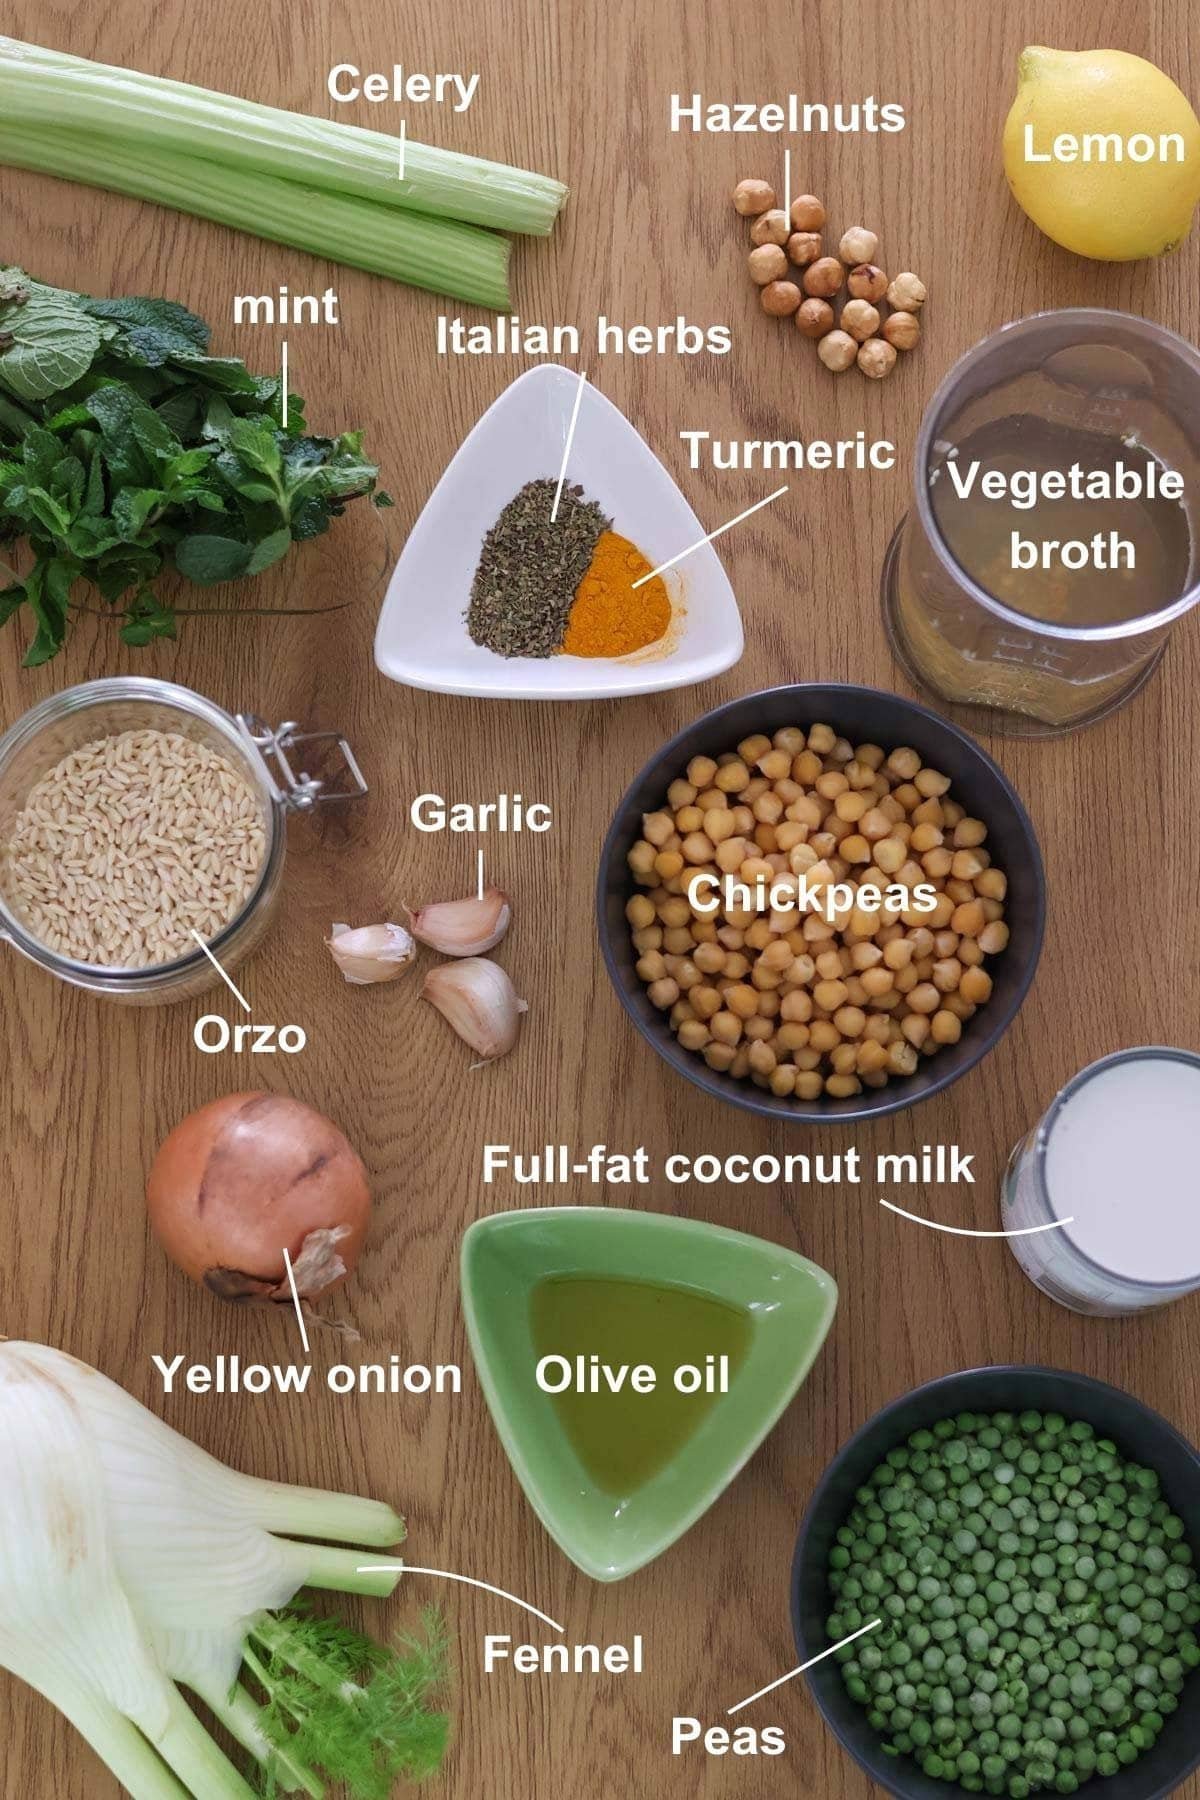 All of the ingredients for the recipe on a wooden table.